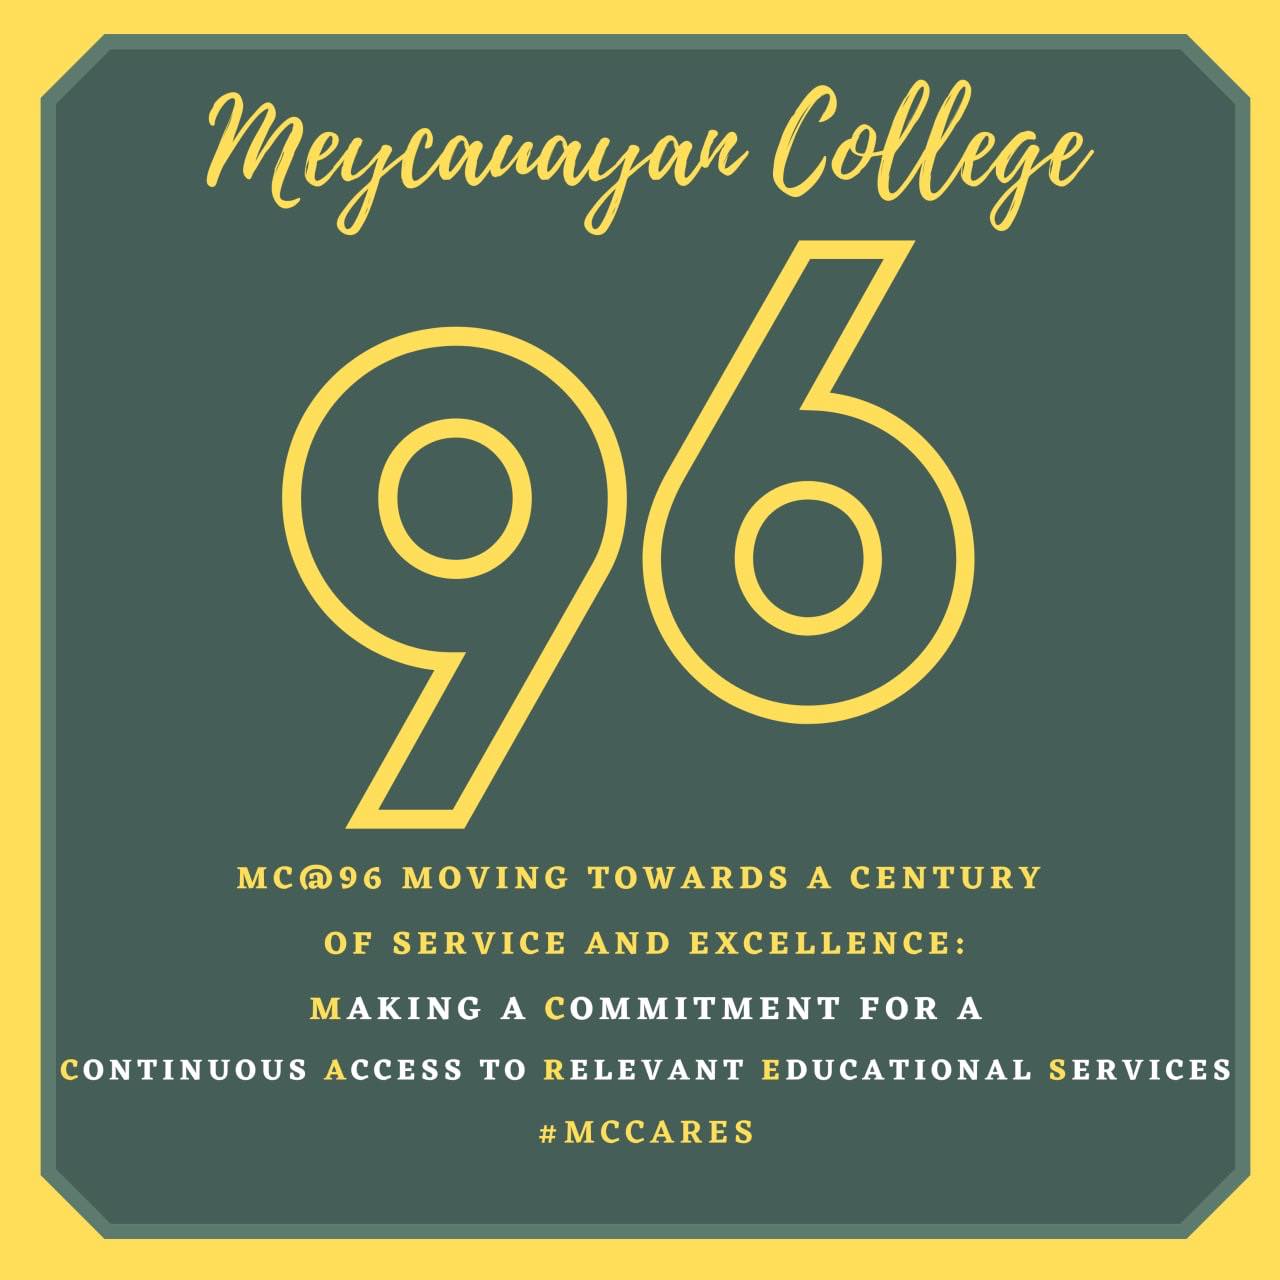 MC highlights 96 years of excellence and service in virtual founding anniversary celebration